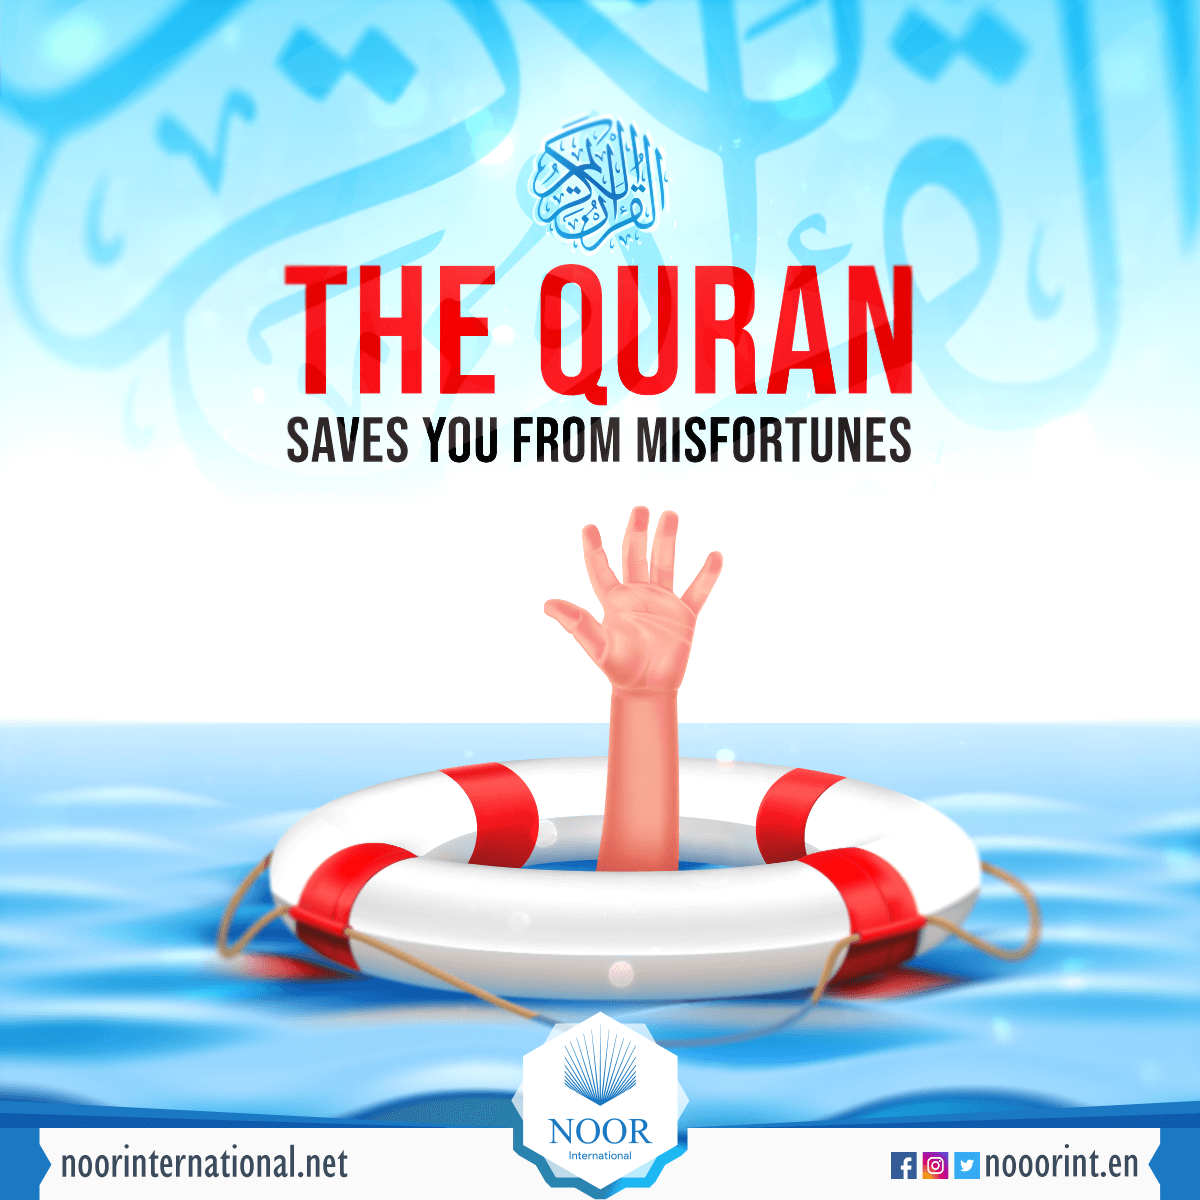 The Quran saves you from misfortunes